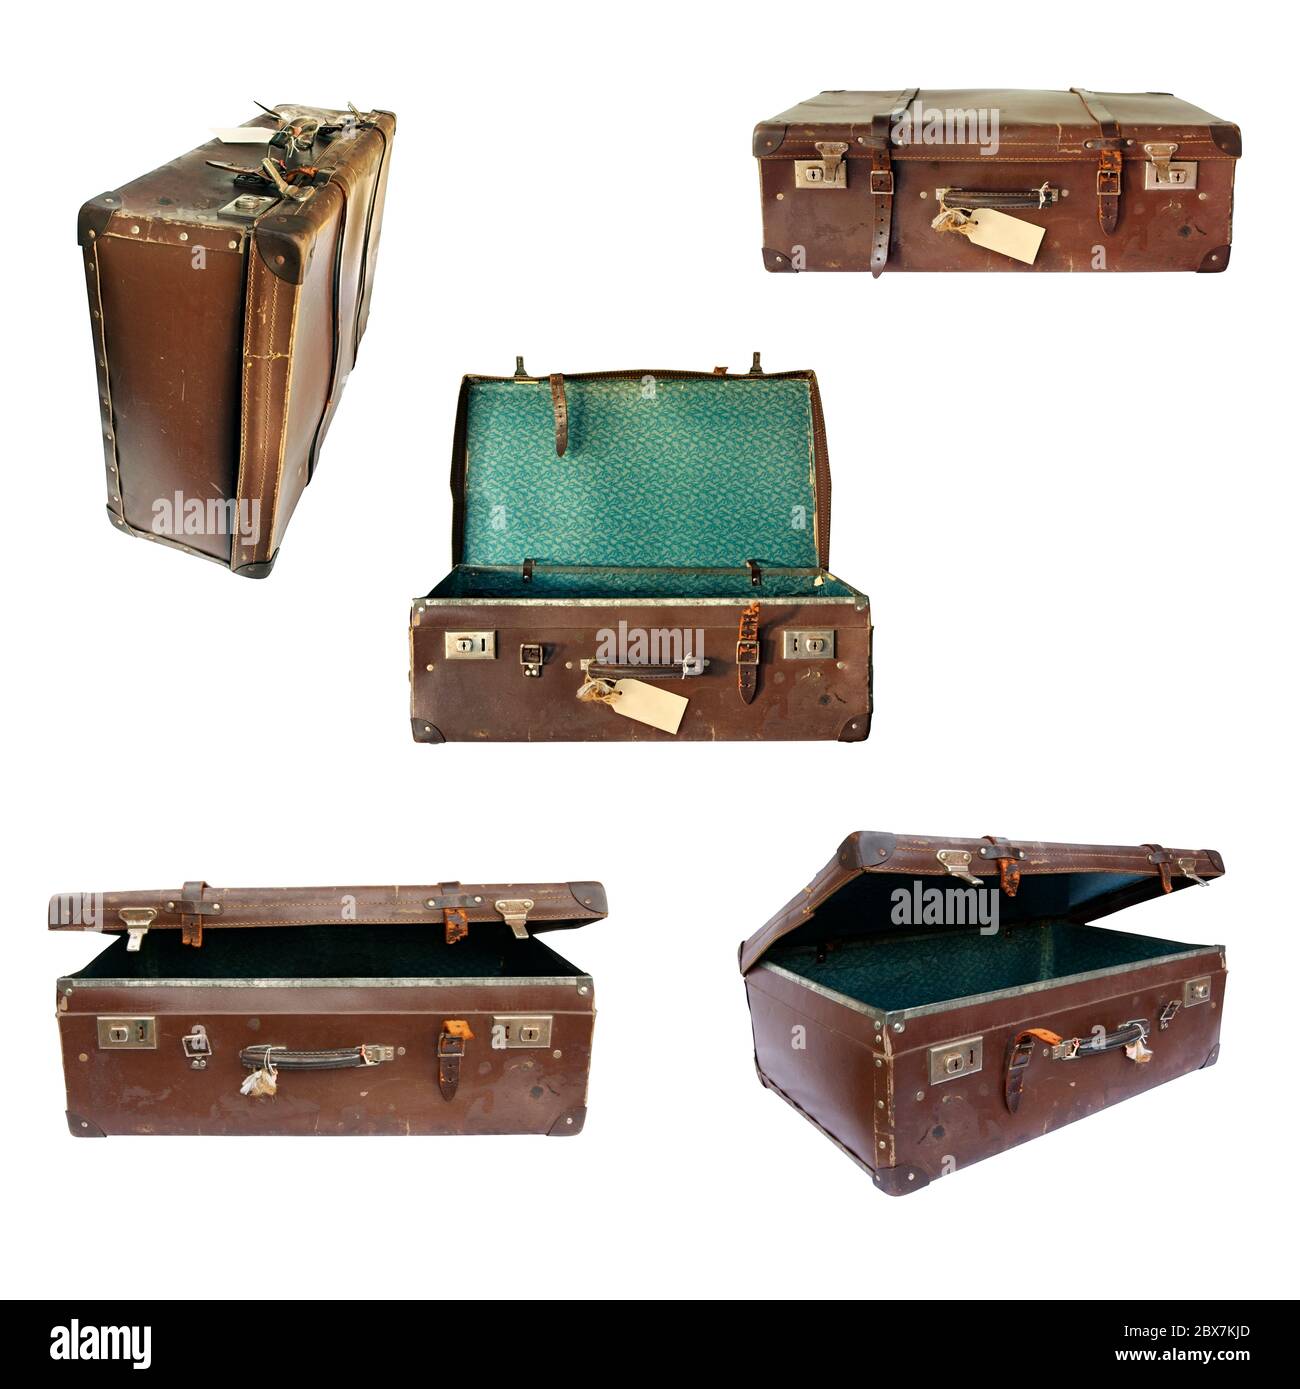 Vintage suitcase collage on white.  Open, closed, front and side views. Stock Photo